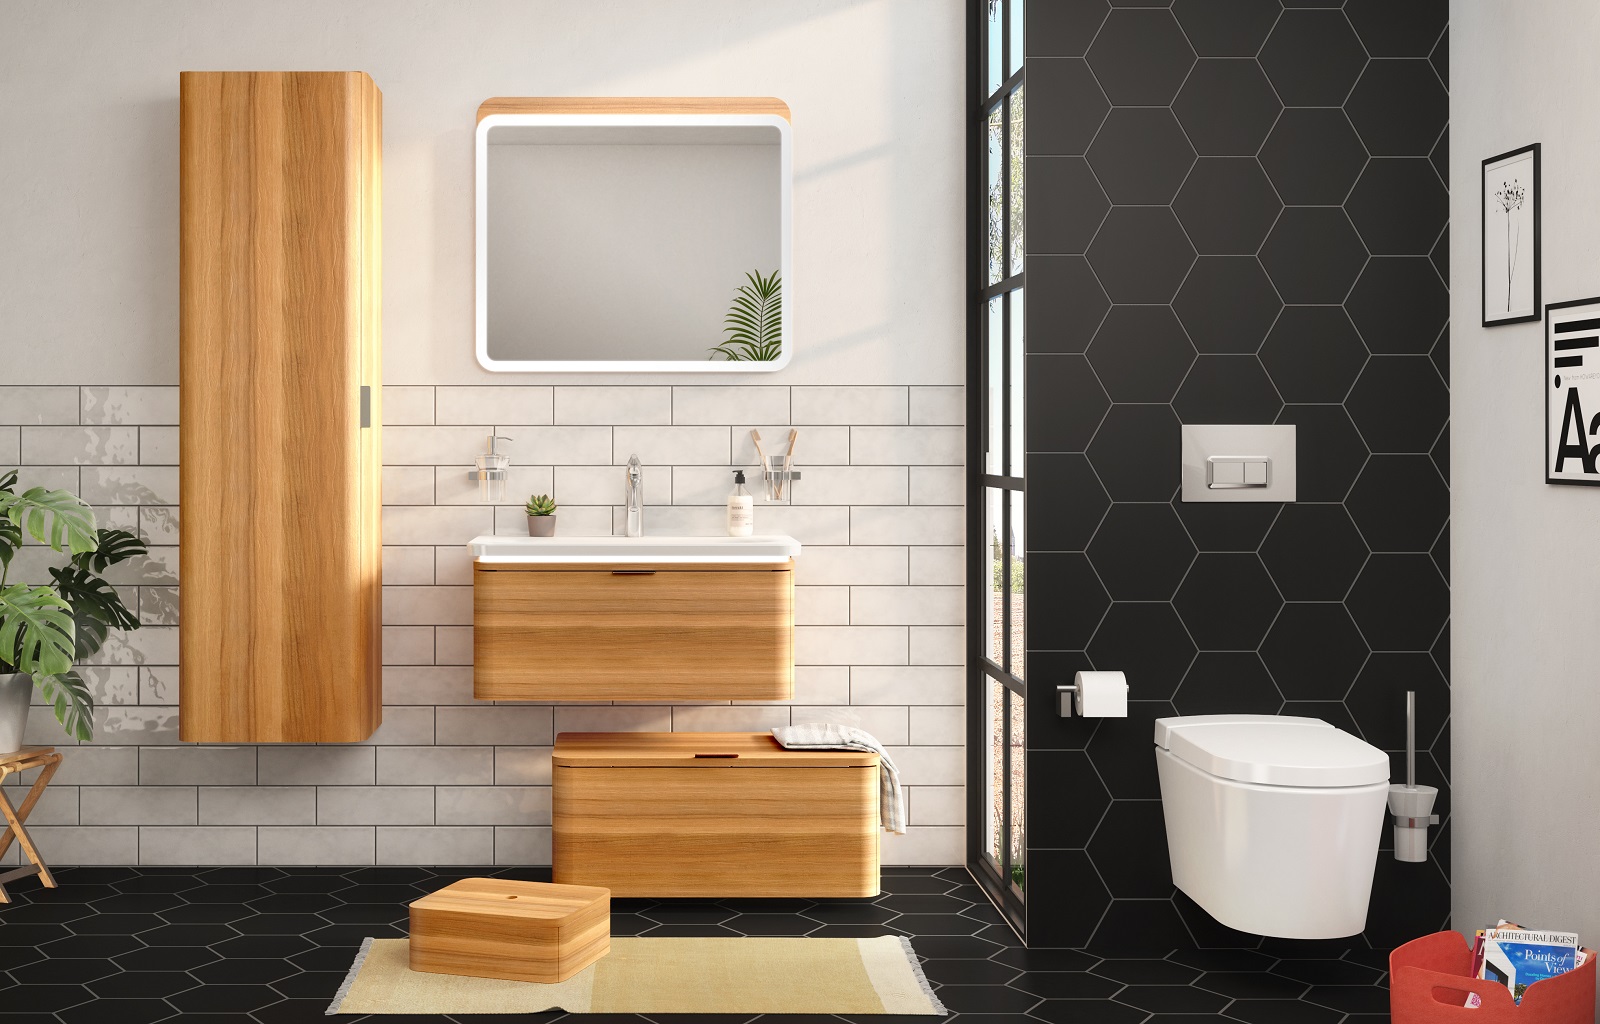 Lifestyle image of a bathroom featuring black hexagonal floor and wall tiles